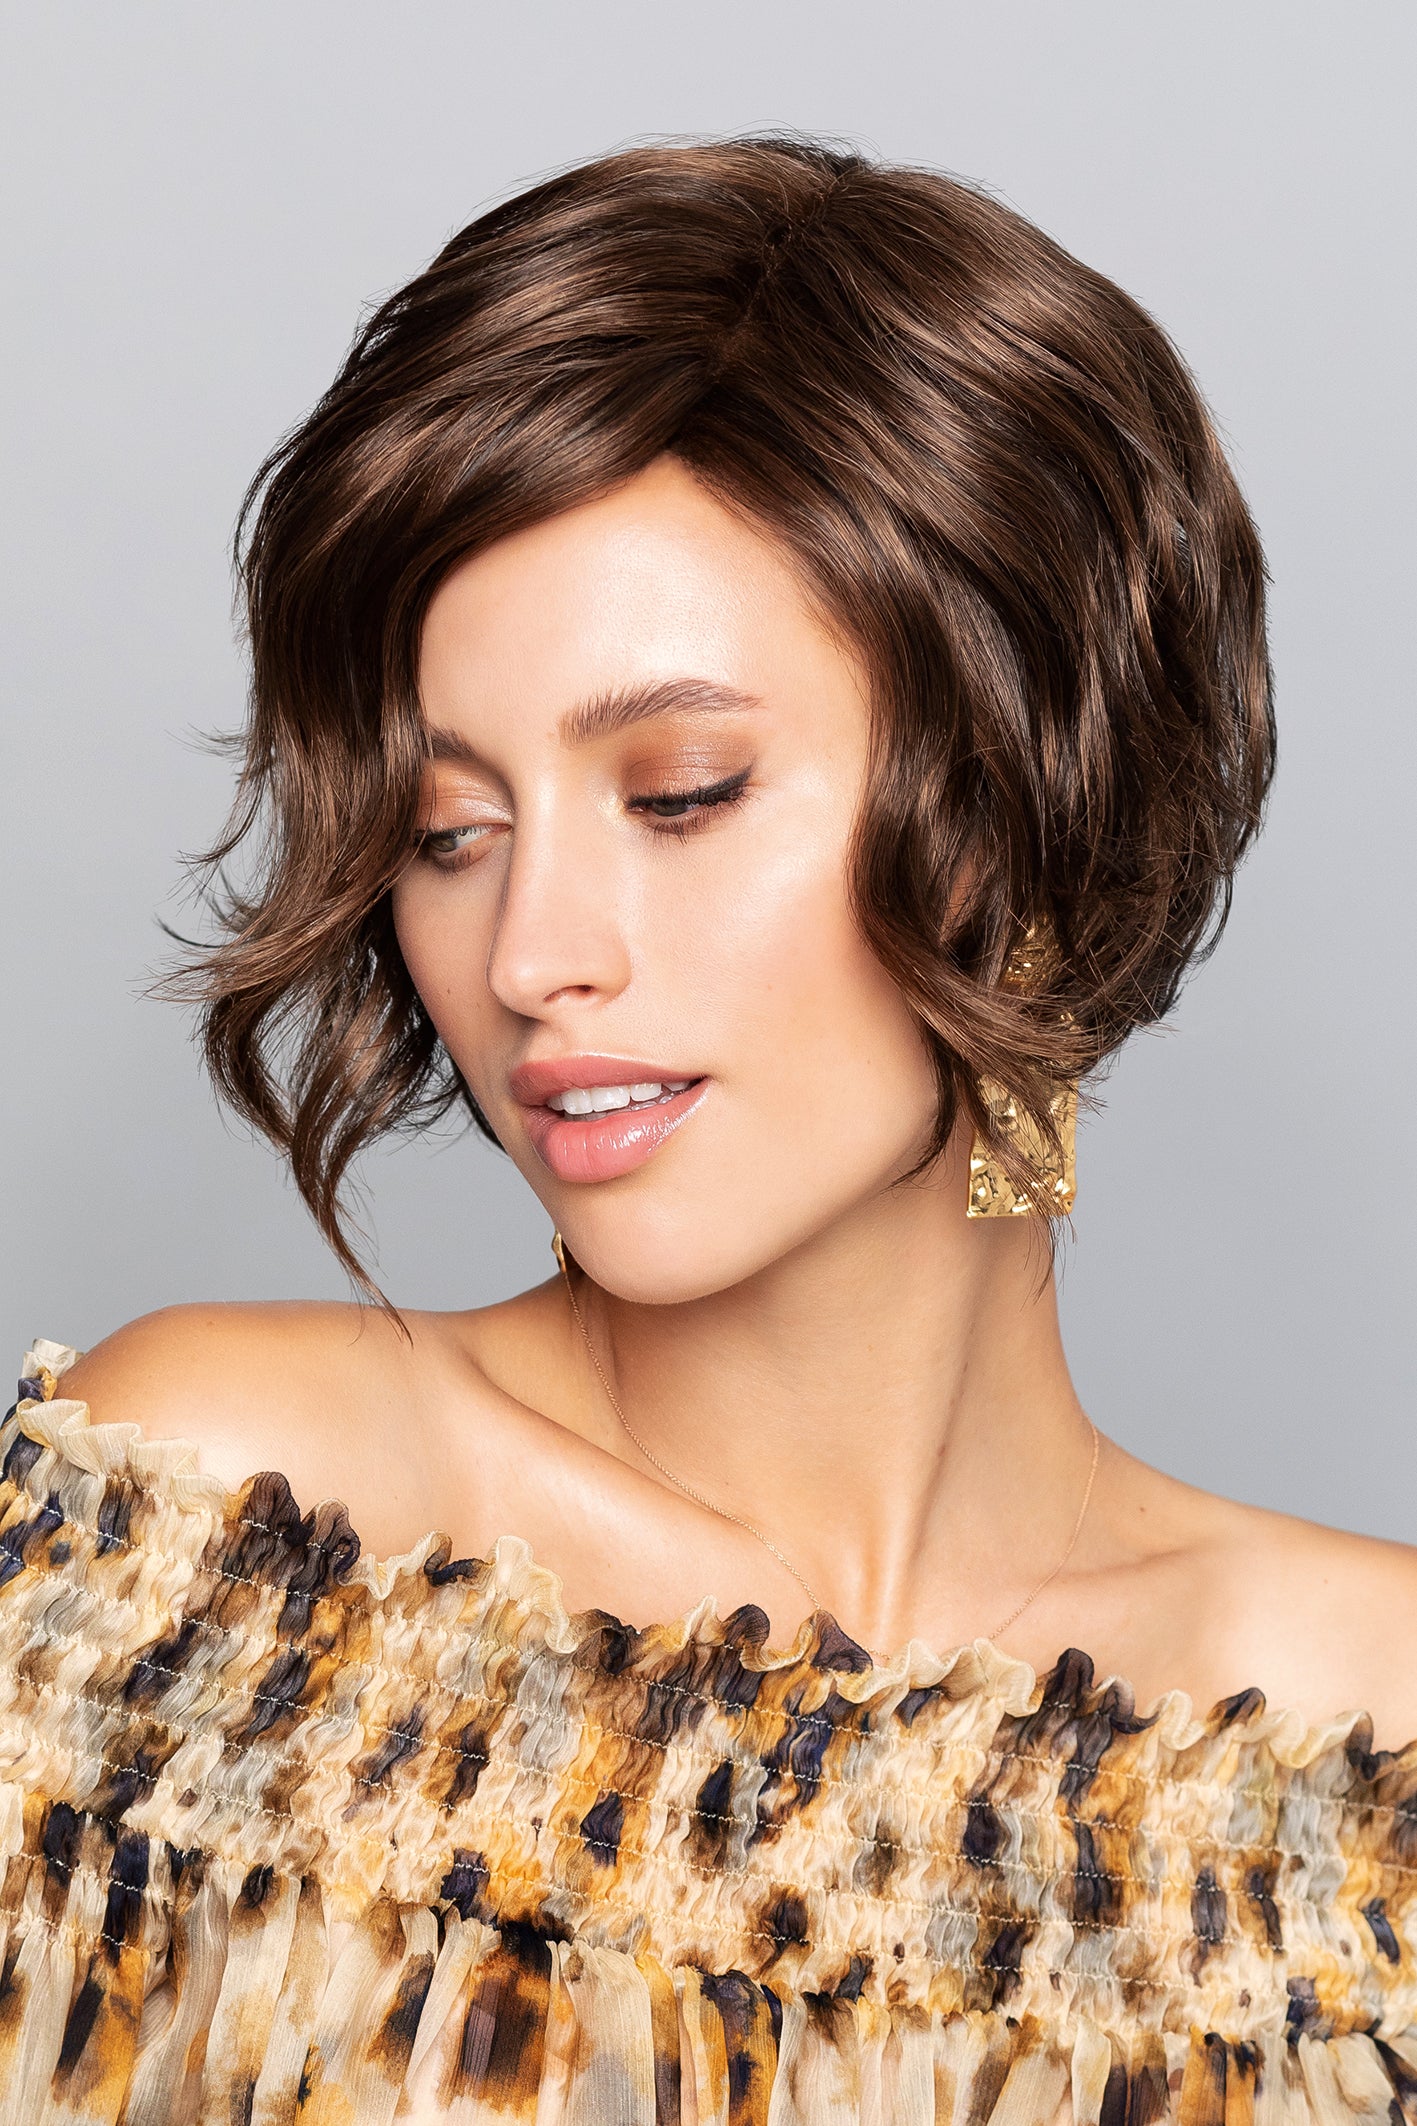 Yuna Lace Part wig - Gisela Mayer Style Book Collection